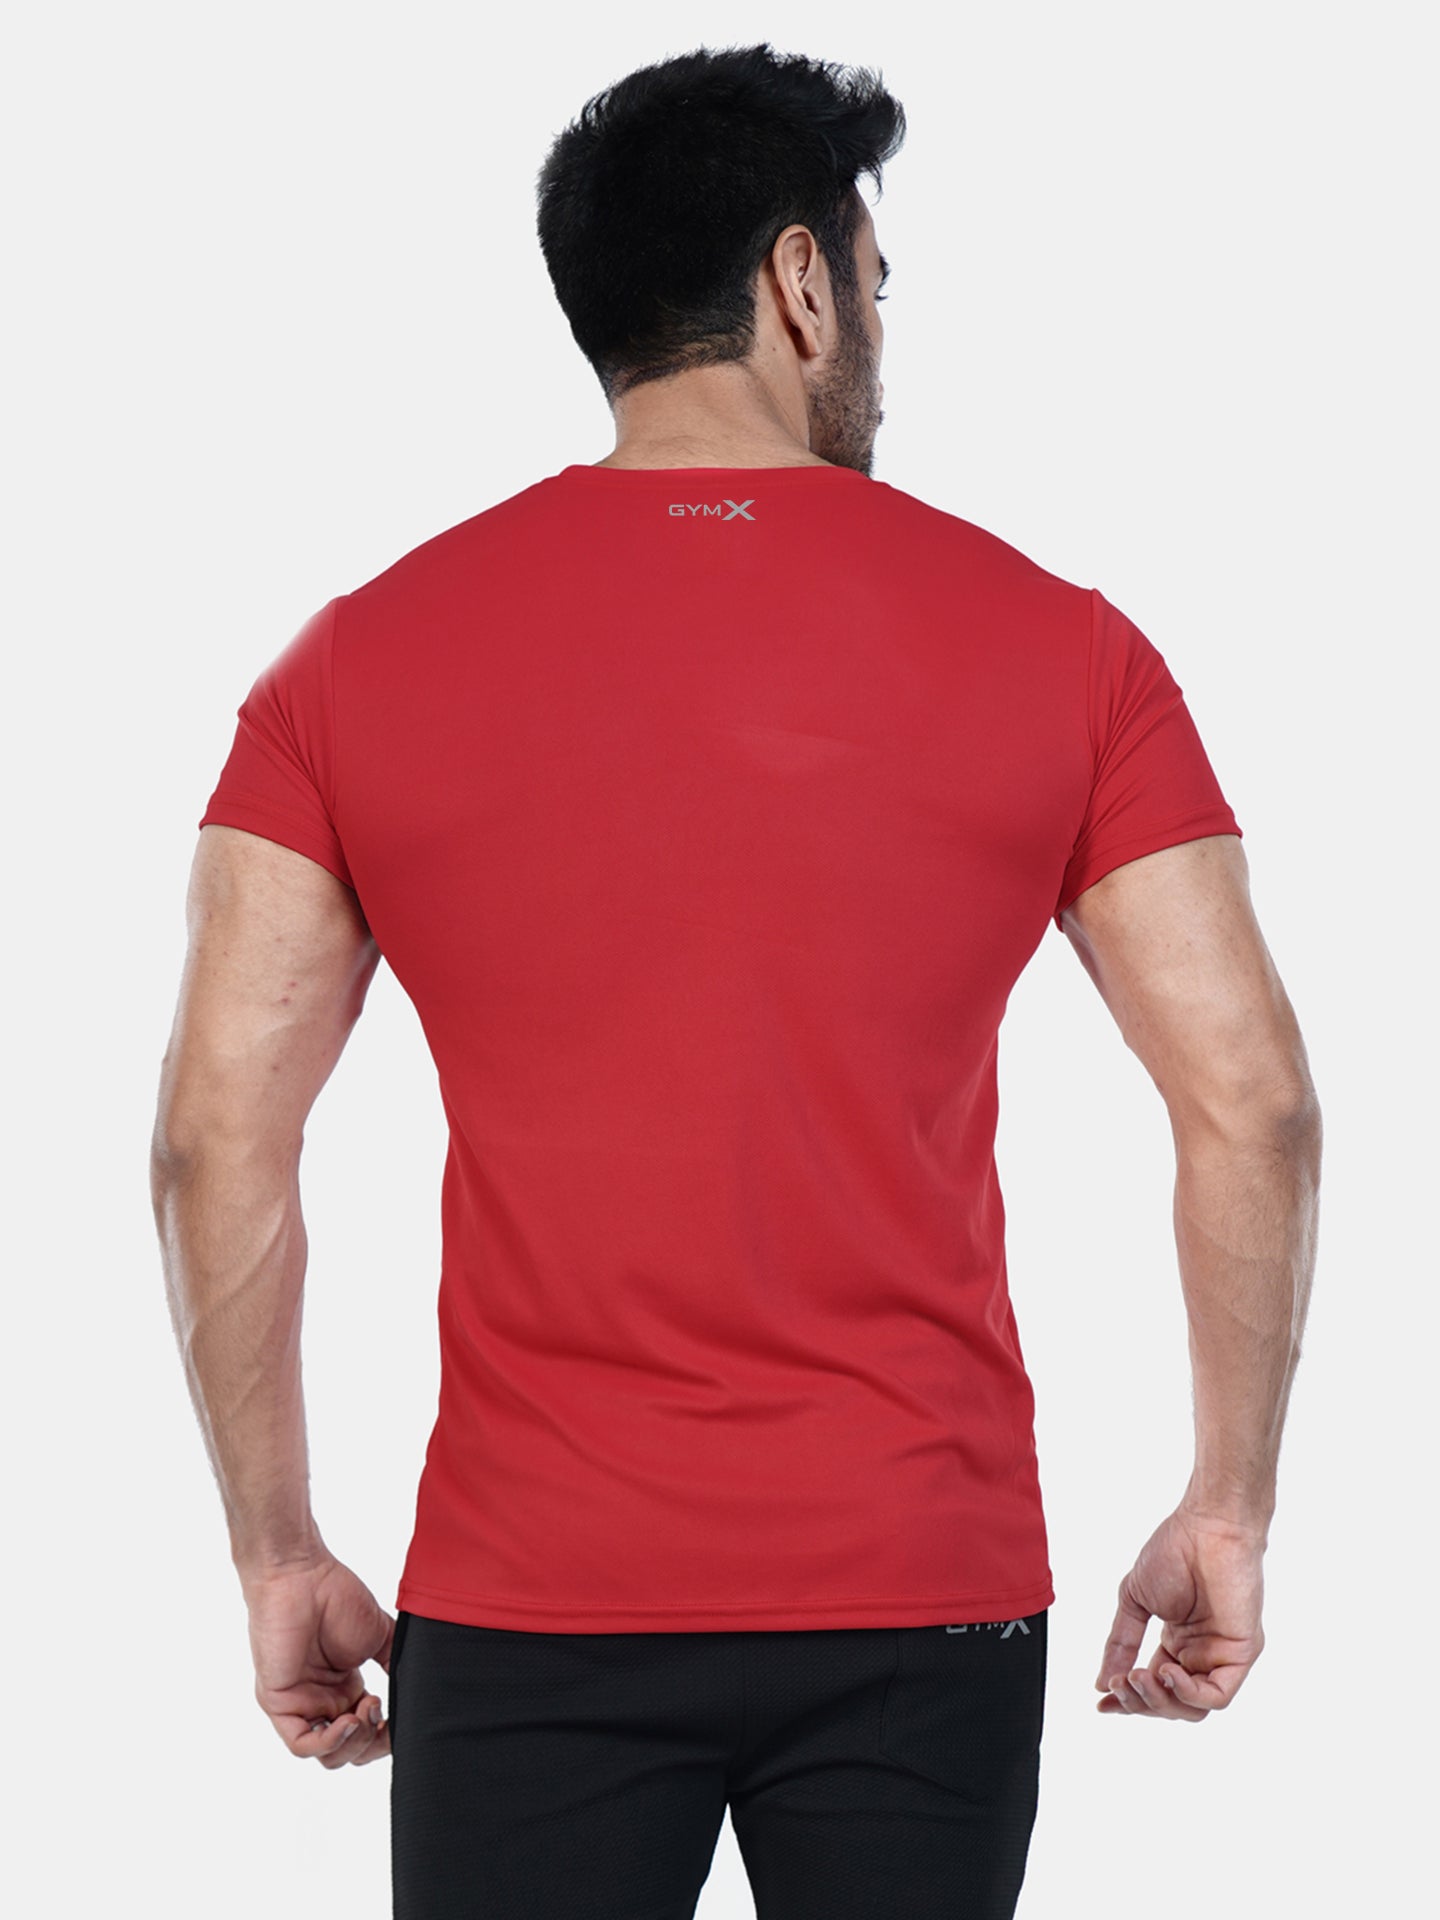 Ultra Lite GymX Red Tee: Time To Kill Some Fat